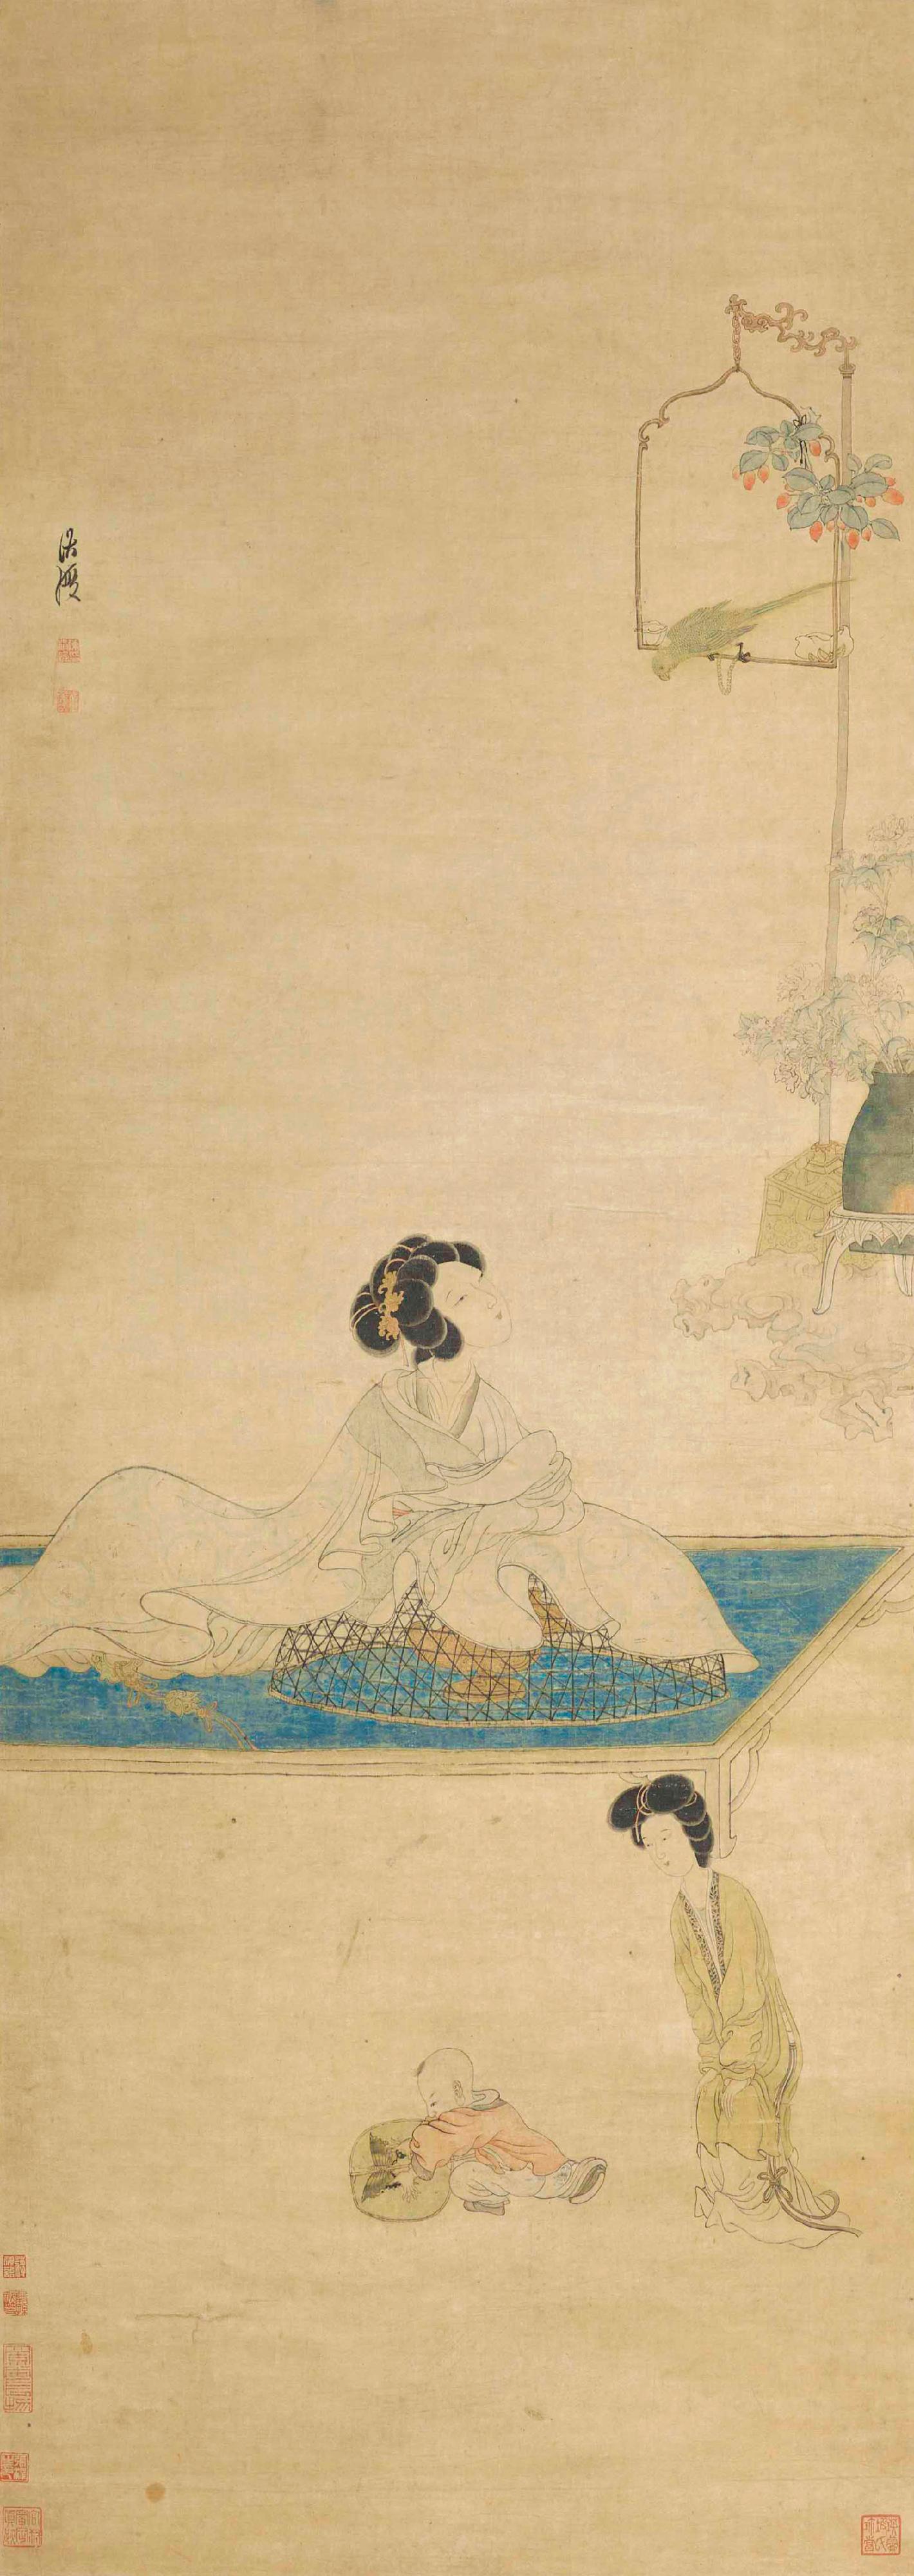 The opening ceremony of the "The Hong Kong Jockey Club Series: Fragrance of Time - In Search of Chinese Art of Scent" exhibition was held today (June 27) at the Hong Kong Museum of Art. Photo shows "Lady reclining on a cage over a censer" by Chen Hongshou from the Ming dynasty, a Grade-1 national treasure from the Shanghai Museum collection.
